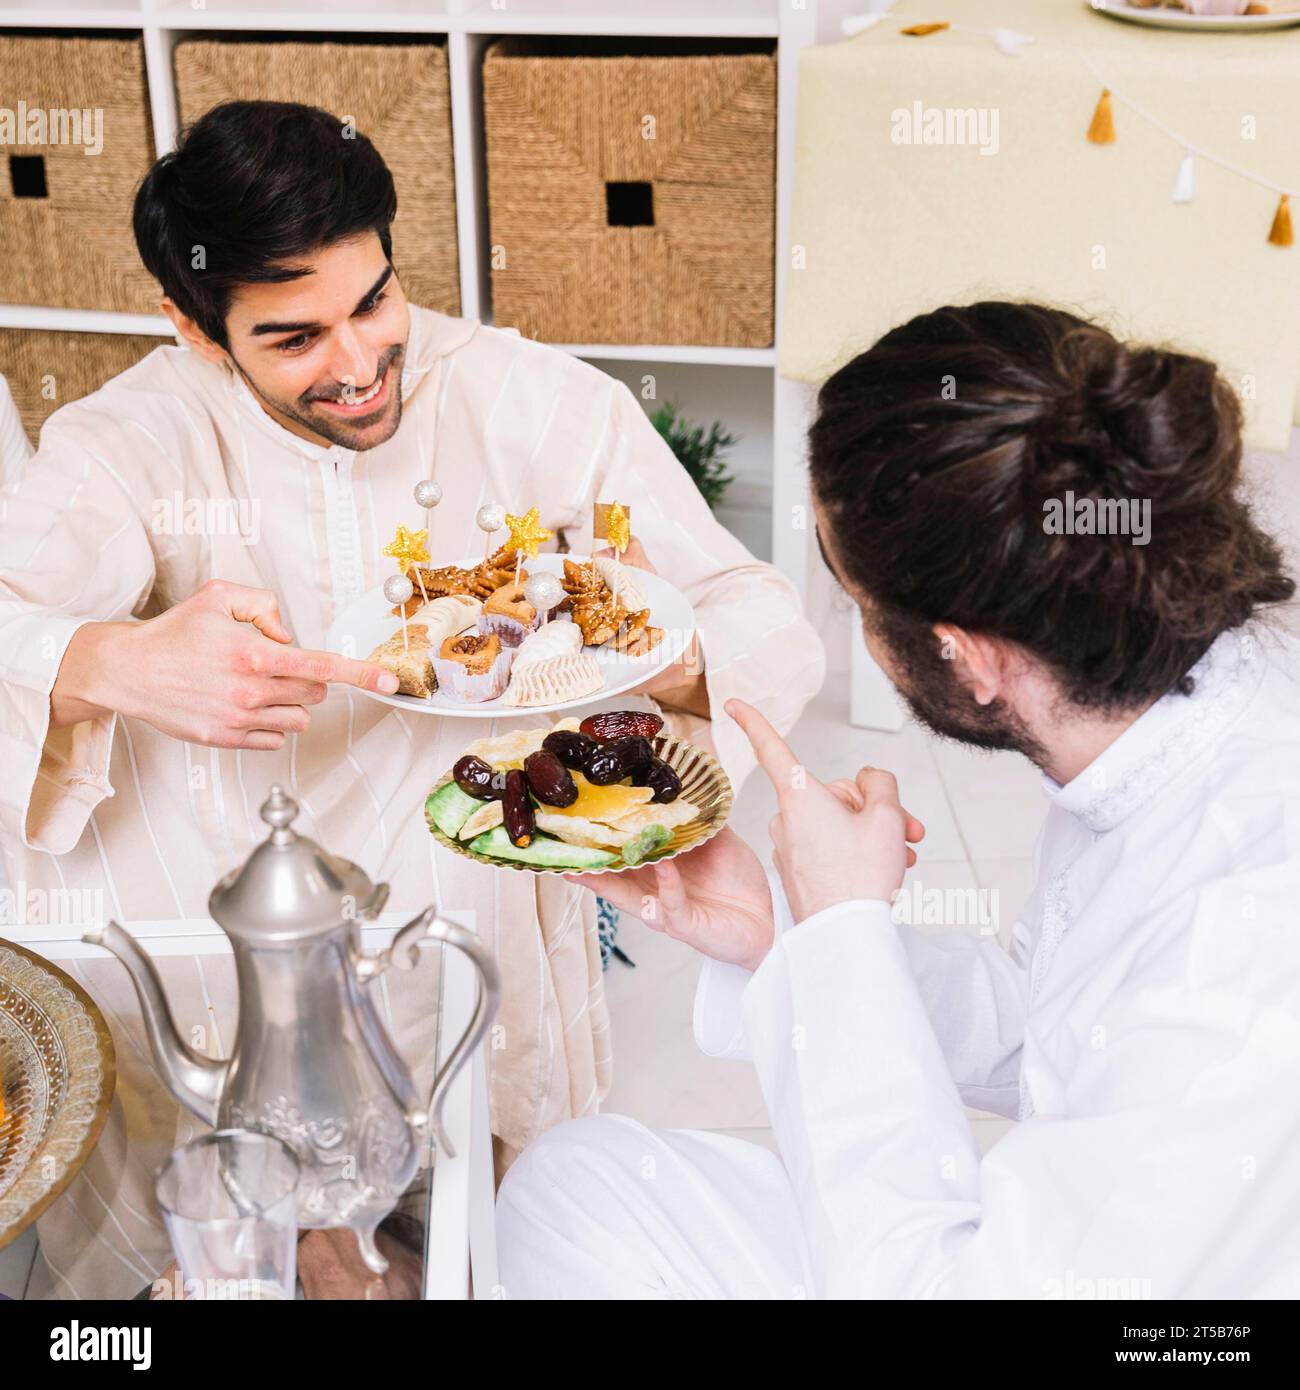 Eid al fitr concept with friends eating Stock Photo